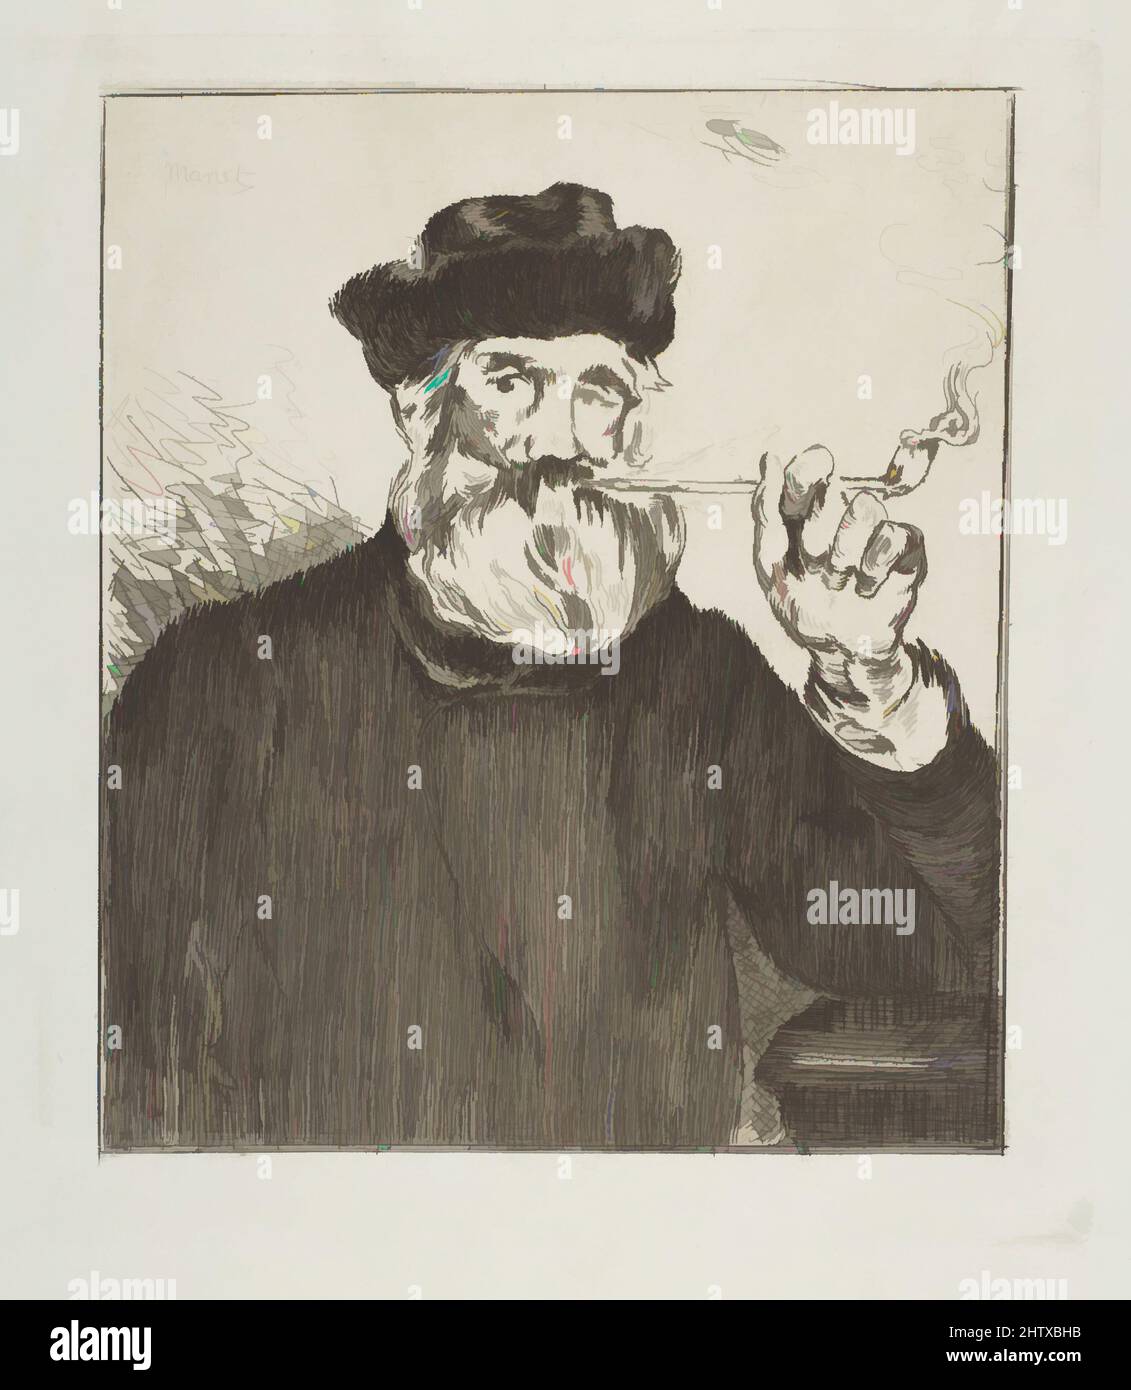 Art inspired by The Smoker (Le Fumeur), 1866–67, Etching on blue laid paper, final state (II), from 1905 Strölin edition, plate: 6 13/16 x 5 13/16in. (17.3 x 14.8cm), Prints, Édouard Manet (French, Paris 1832–1883 Paris, Classic works modernized by Artotop with a splash of modernity. Shapes, color and value, eye-catching visual impact on art. Emotions through freedom of artworks in a contemporary way. A timeless message pursuing a wildly creative new direction. Artists turning to the digital medium and creating the Artotop NFT Stock Photo